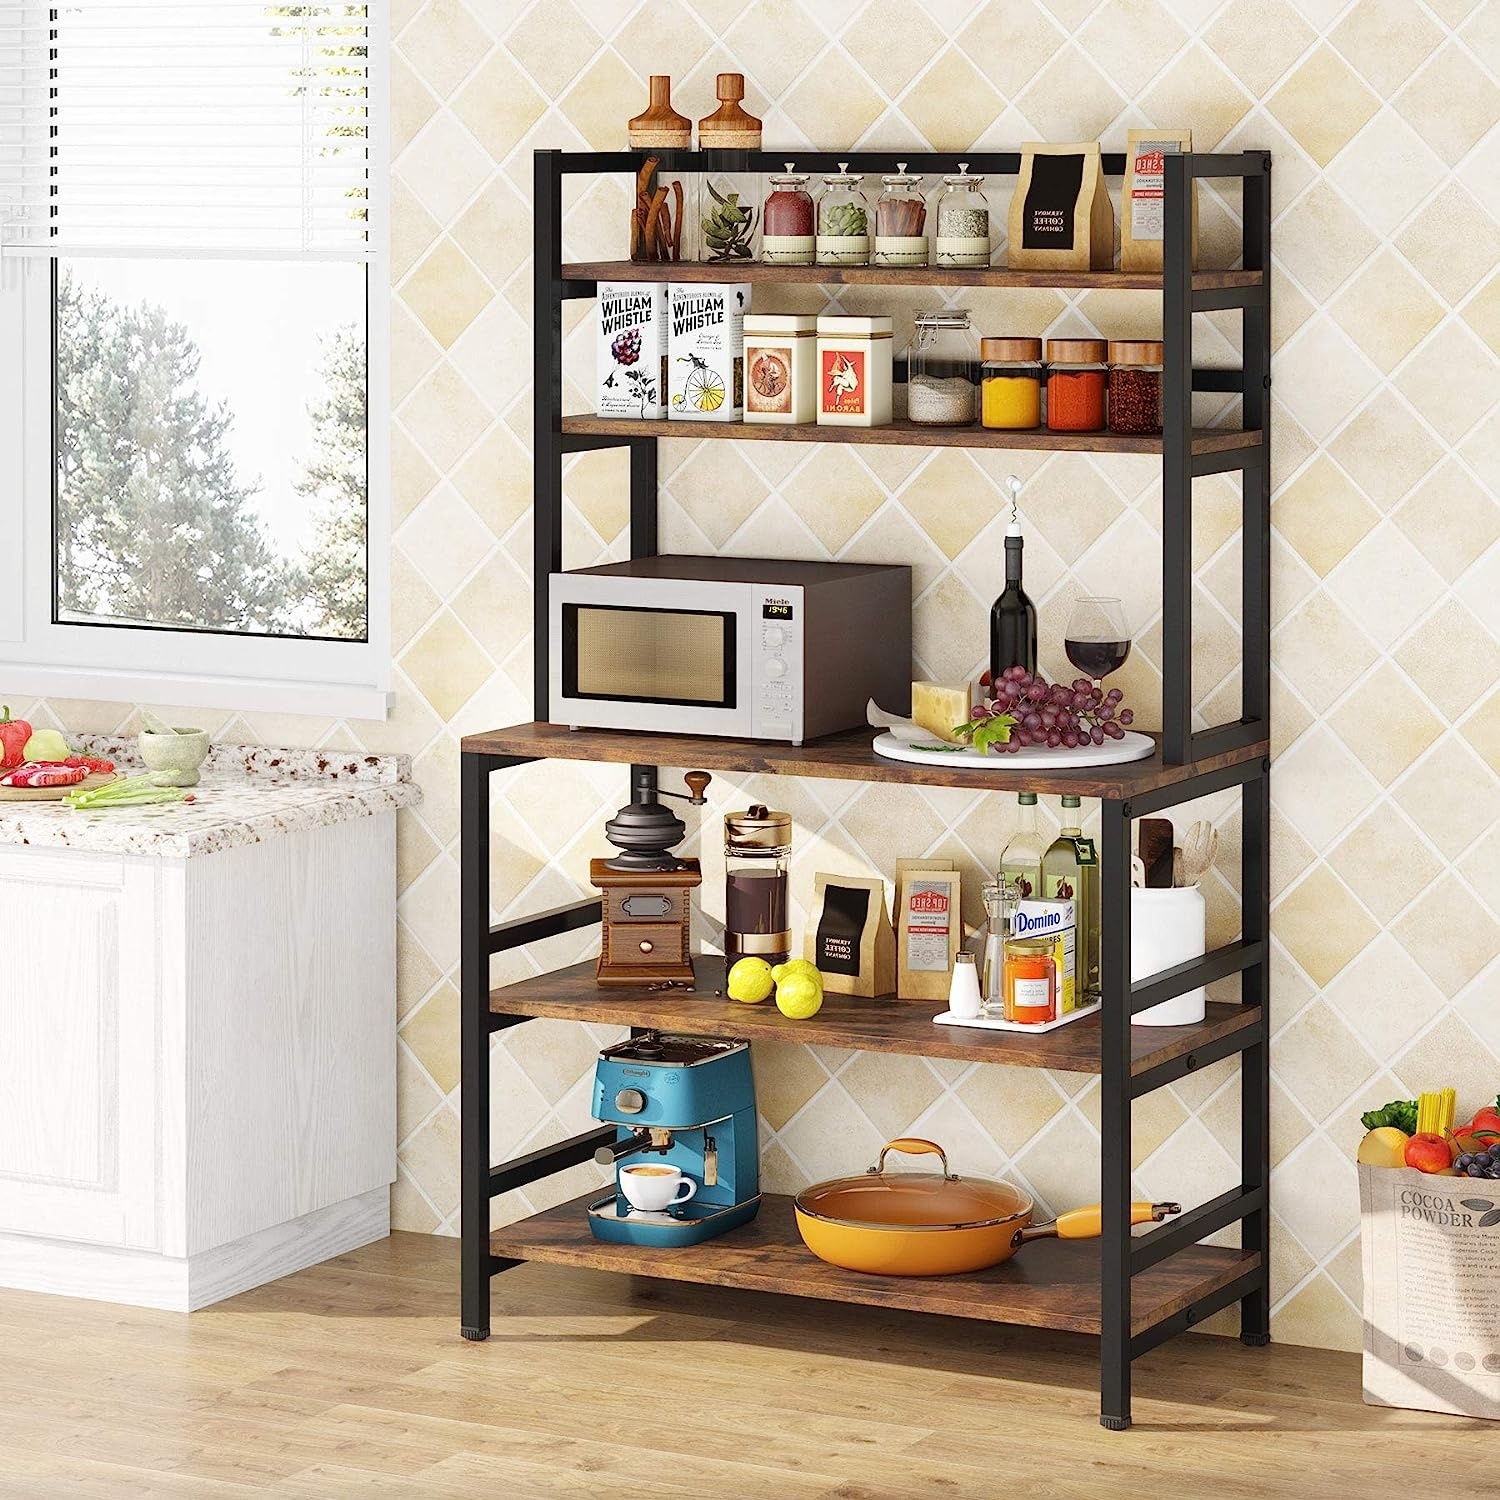 https://ak1.ostkcdn.com/images/products/is/images/direct/cfc004d22e31696f94f0a0df32f0c9aa281ce6ea/5-Tier-Kitchen-Bakers-Rack-Kitchen-Stand-Utility-Storage-Cart.jpg